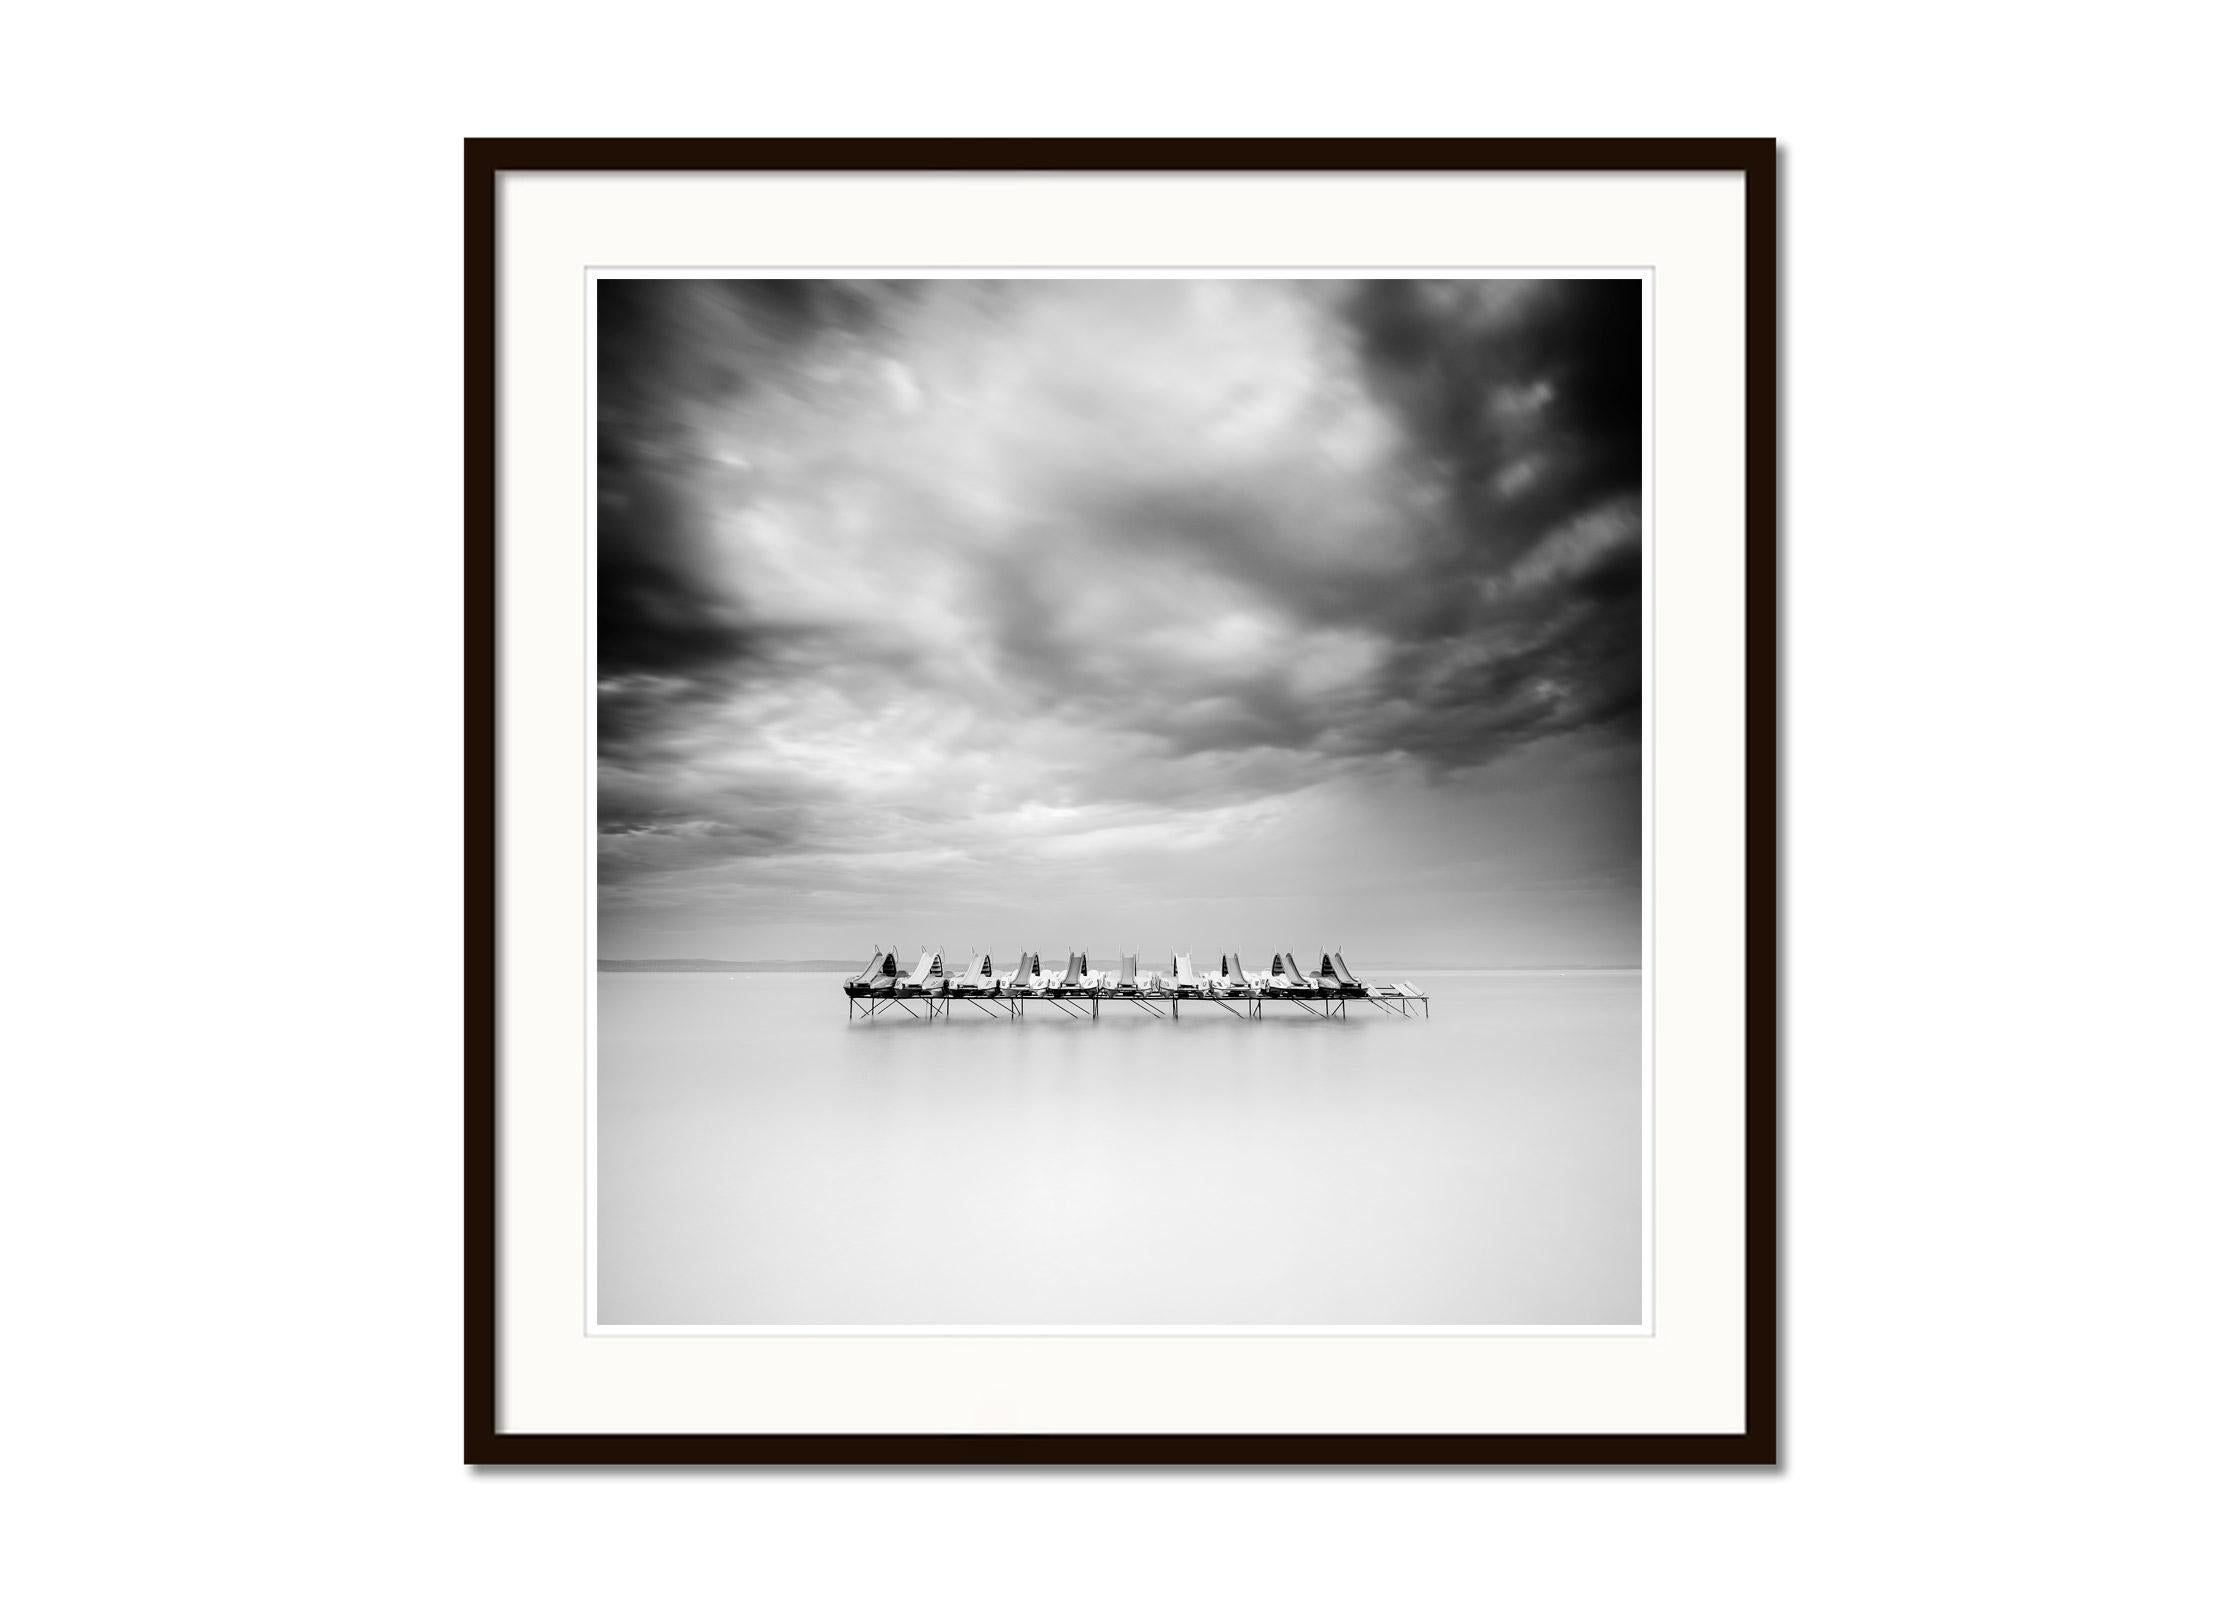 Paddelboot, minimalism, black and white, long exposure, waterscape photography - Contemporary Photograph by Gerald Berghammer